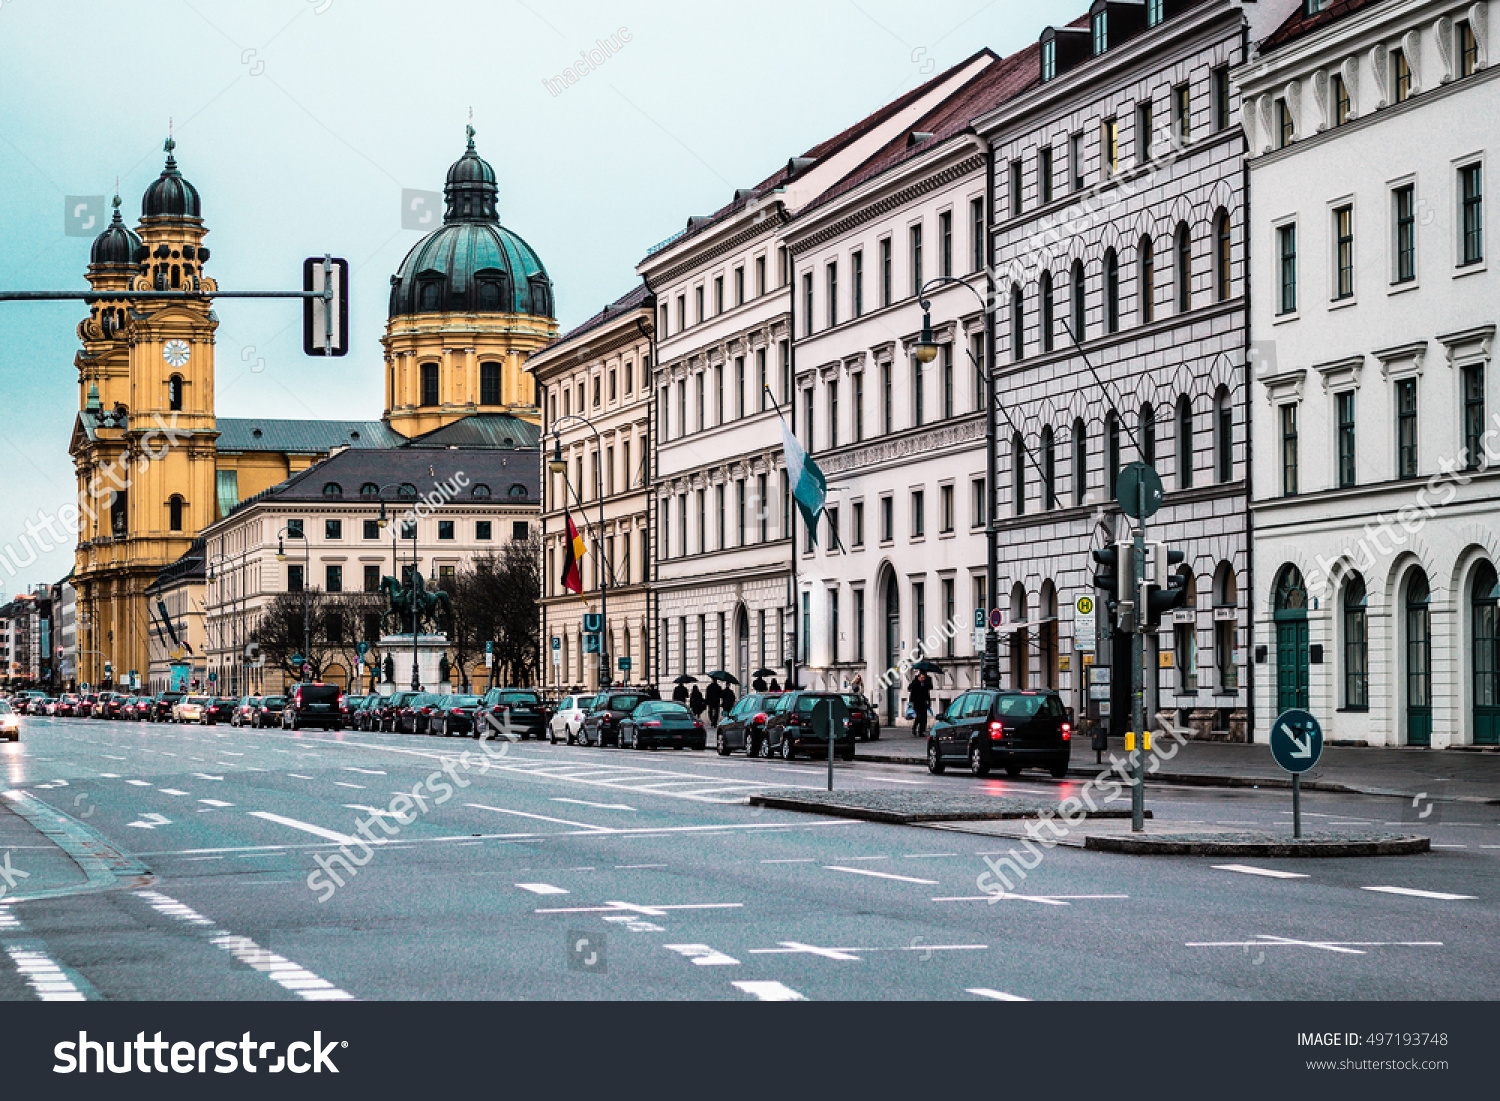 Photo of Munich buildings and houses, Germany #497193748